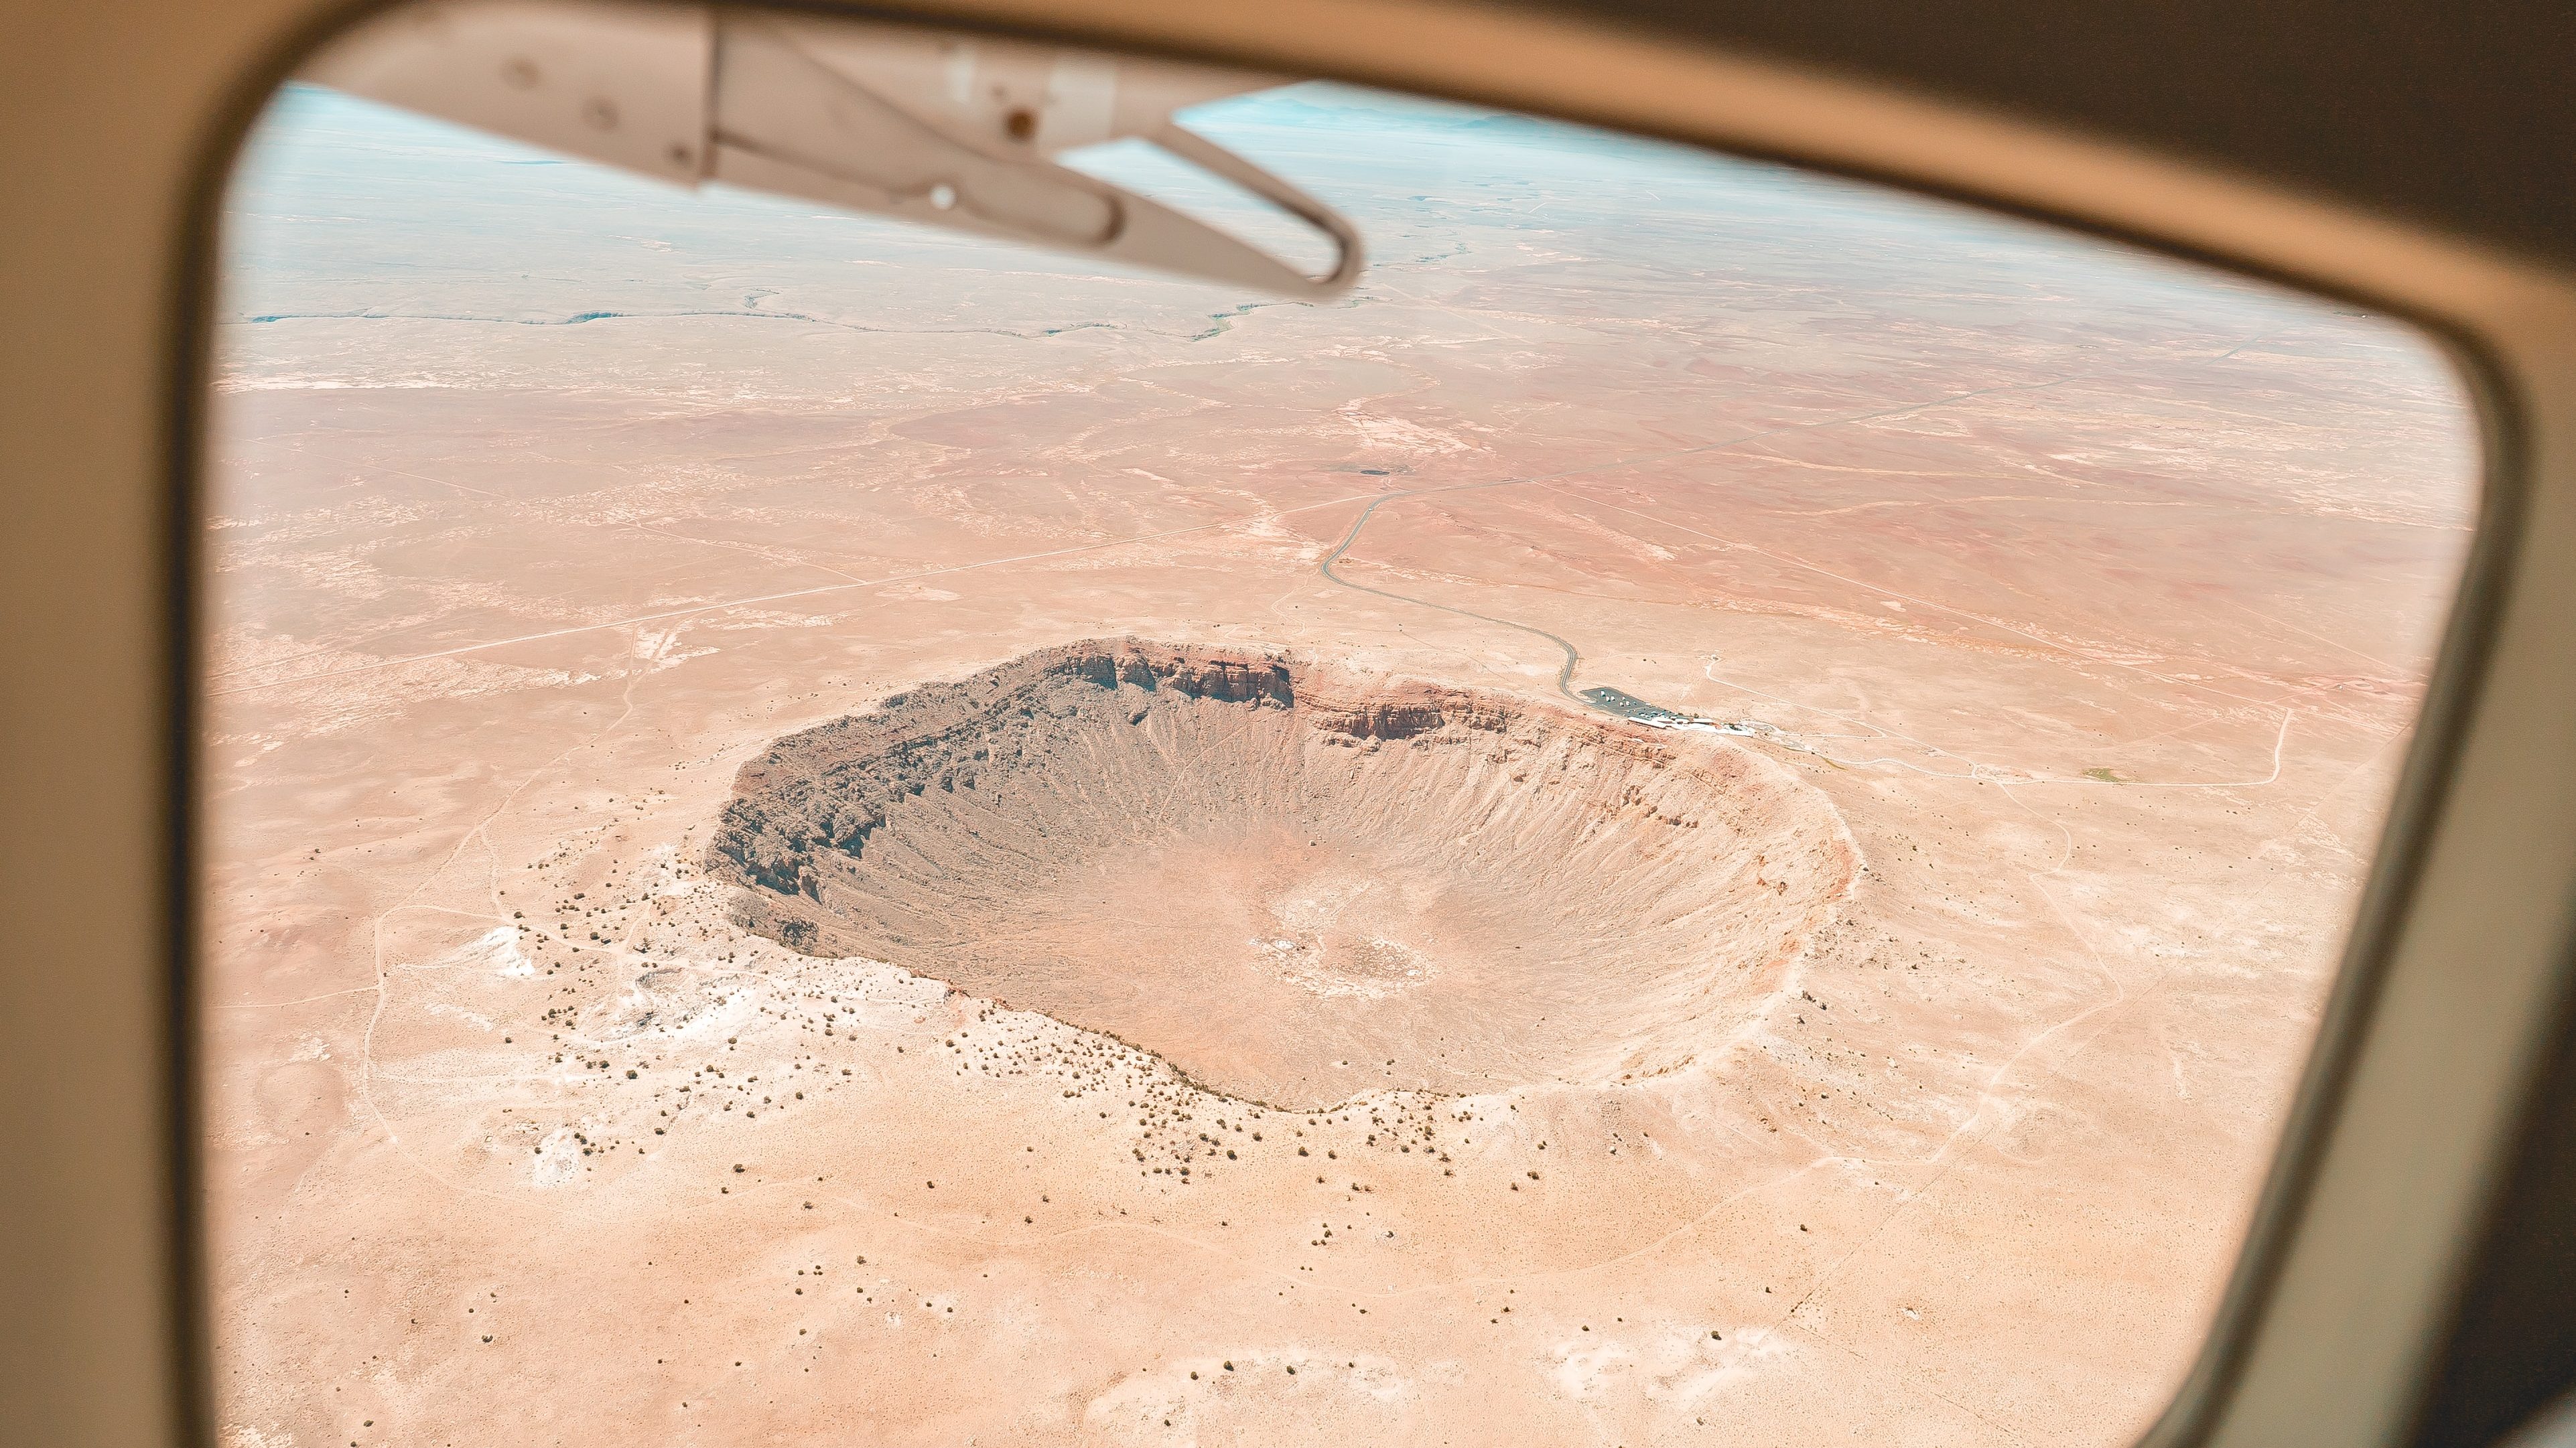 A giant space rock demolished an ancient city, illustrated here by a crater